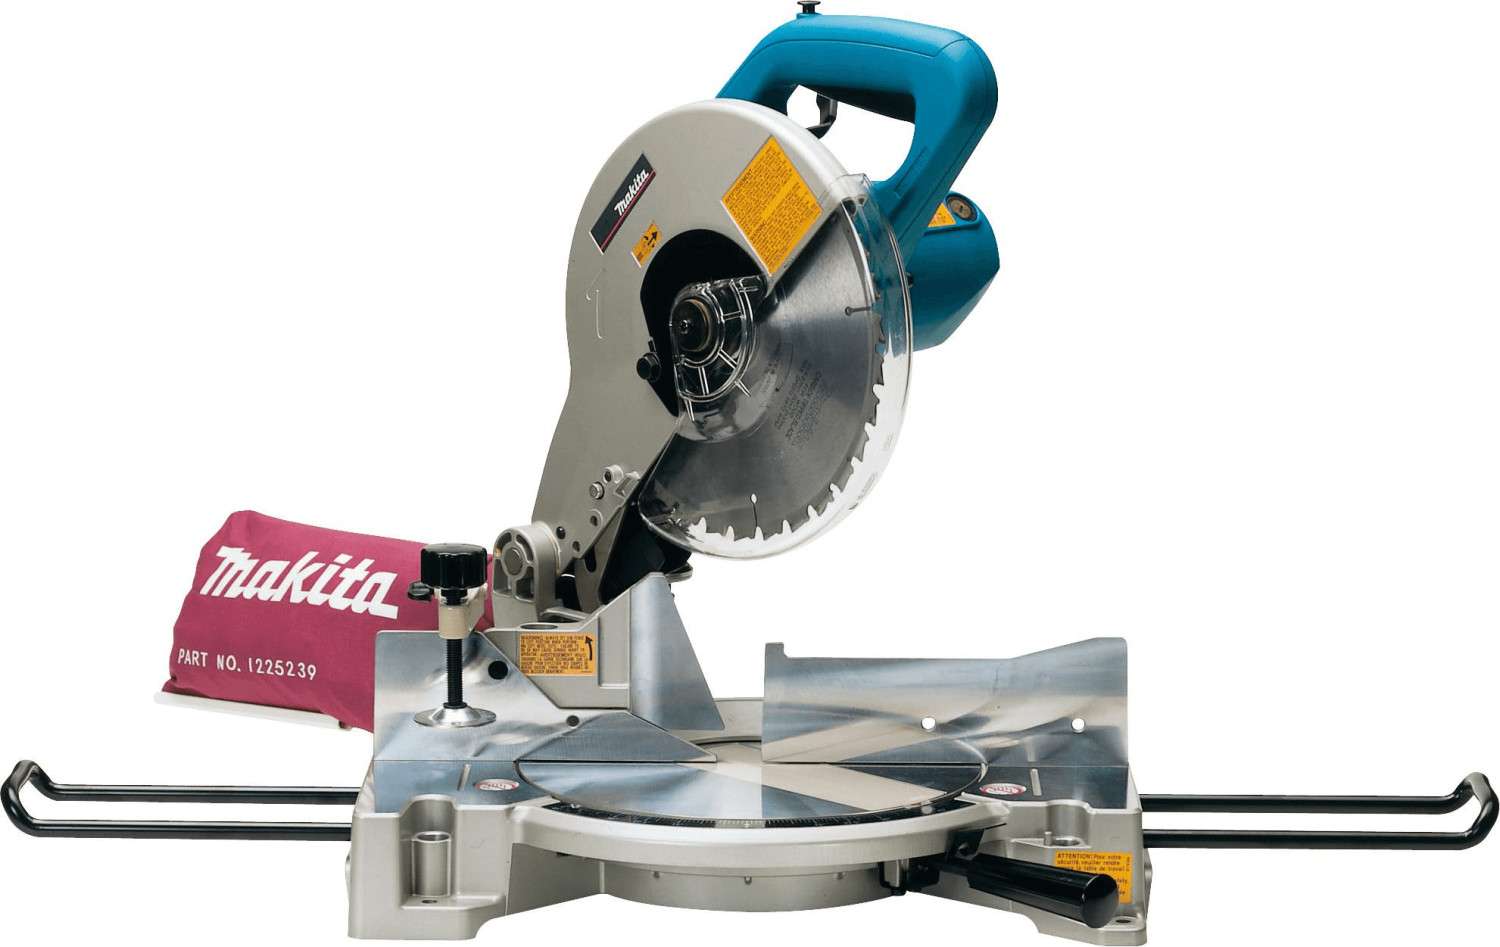 Buy Makita LS1040 from £239.00 (Today) – Best s on idealo.co.uk